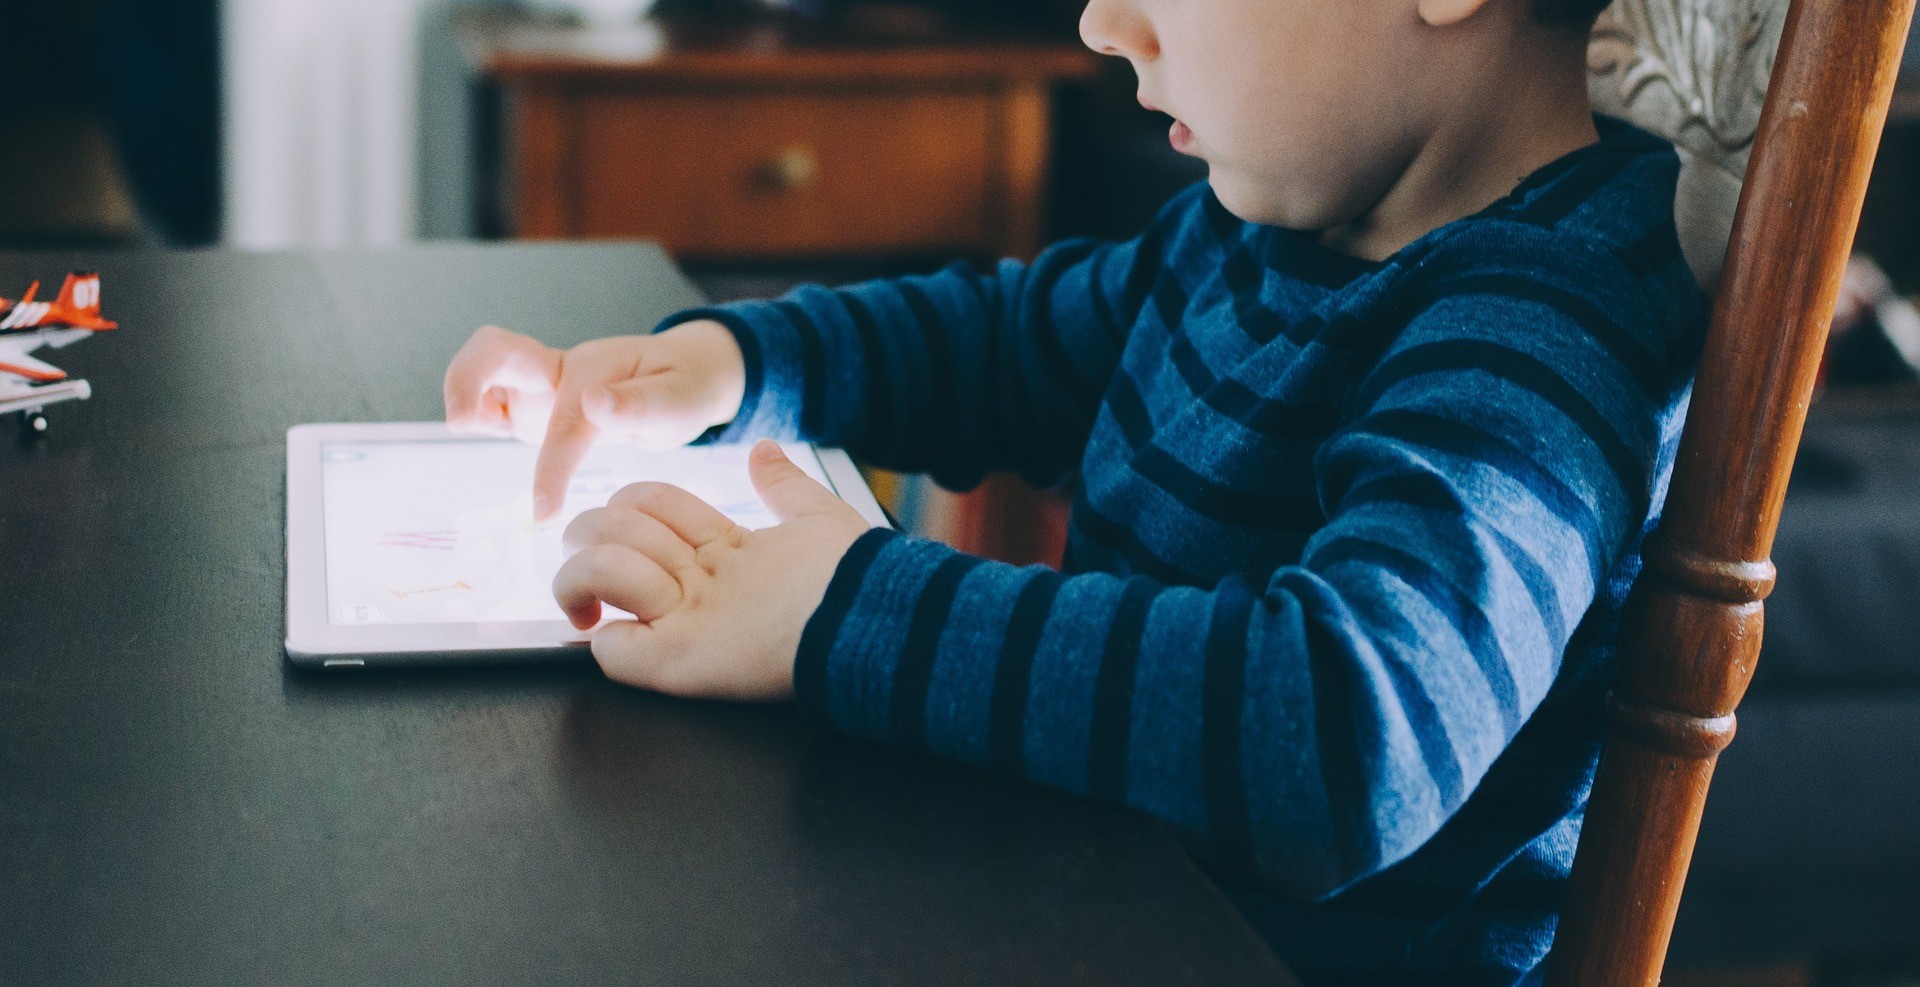 What makes screen time educational